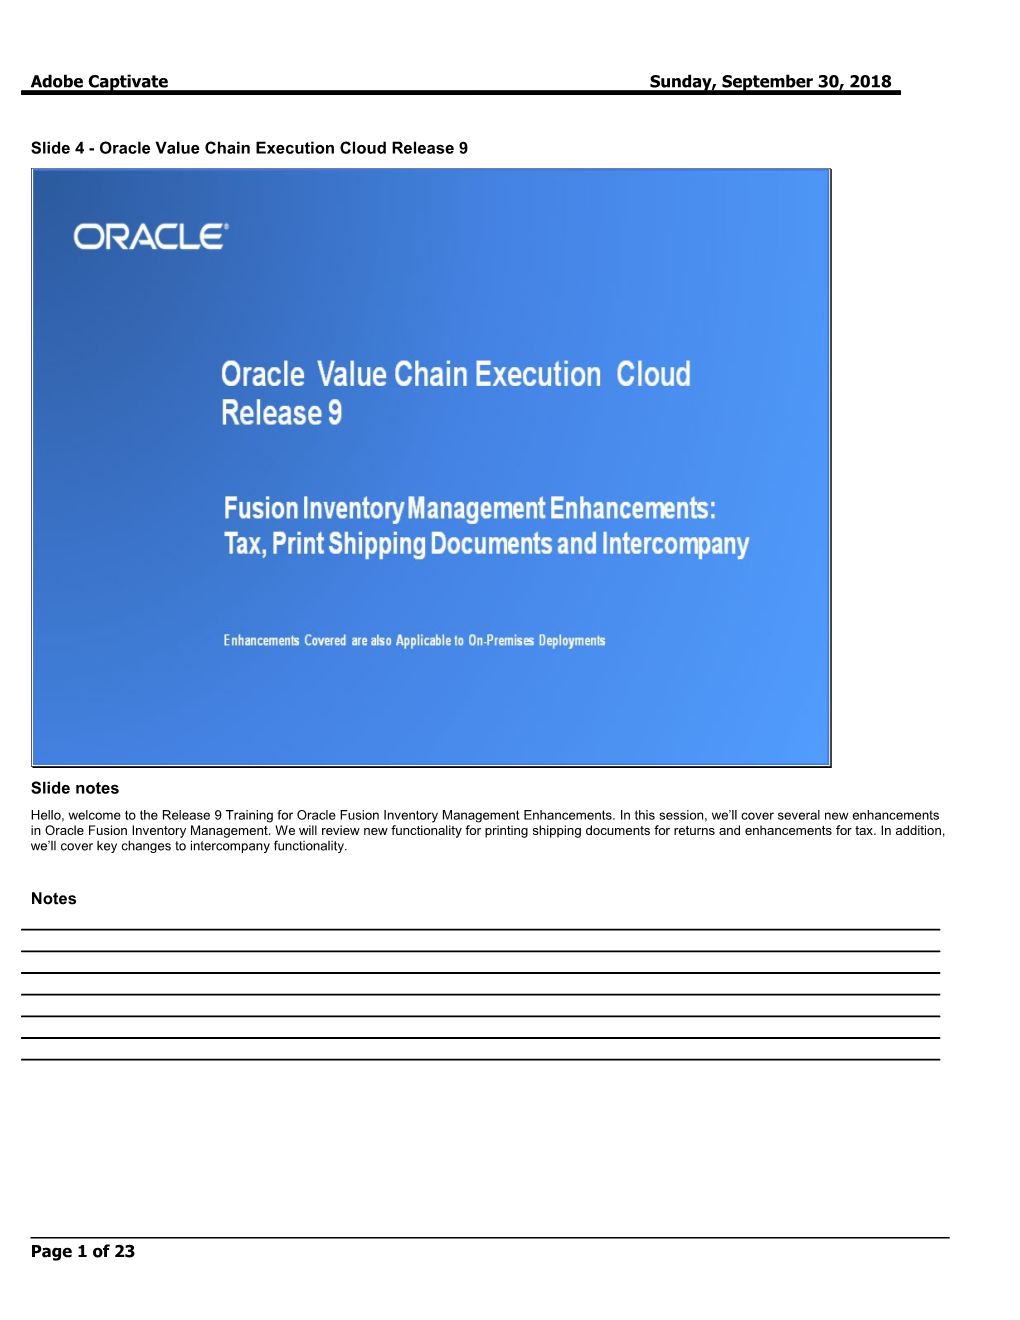 Slide 4 - Oracle Value Chain Execution Cloud Release 9